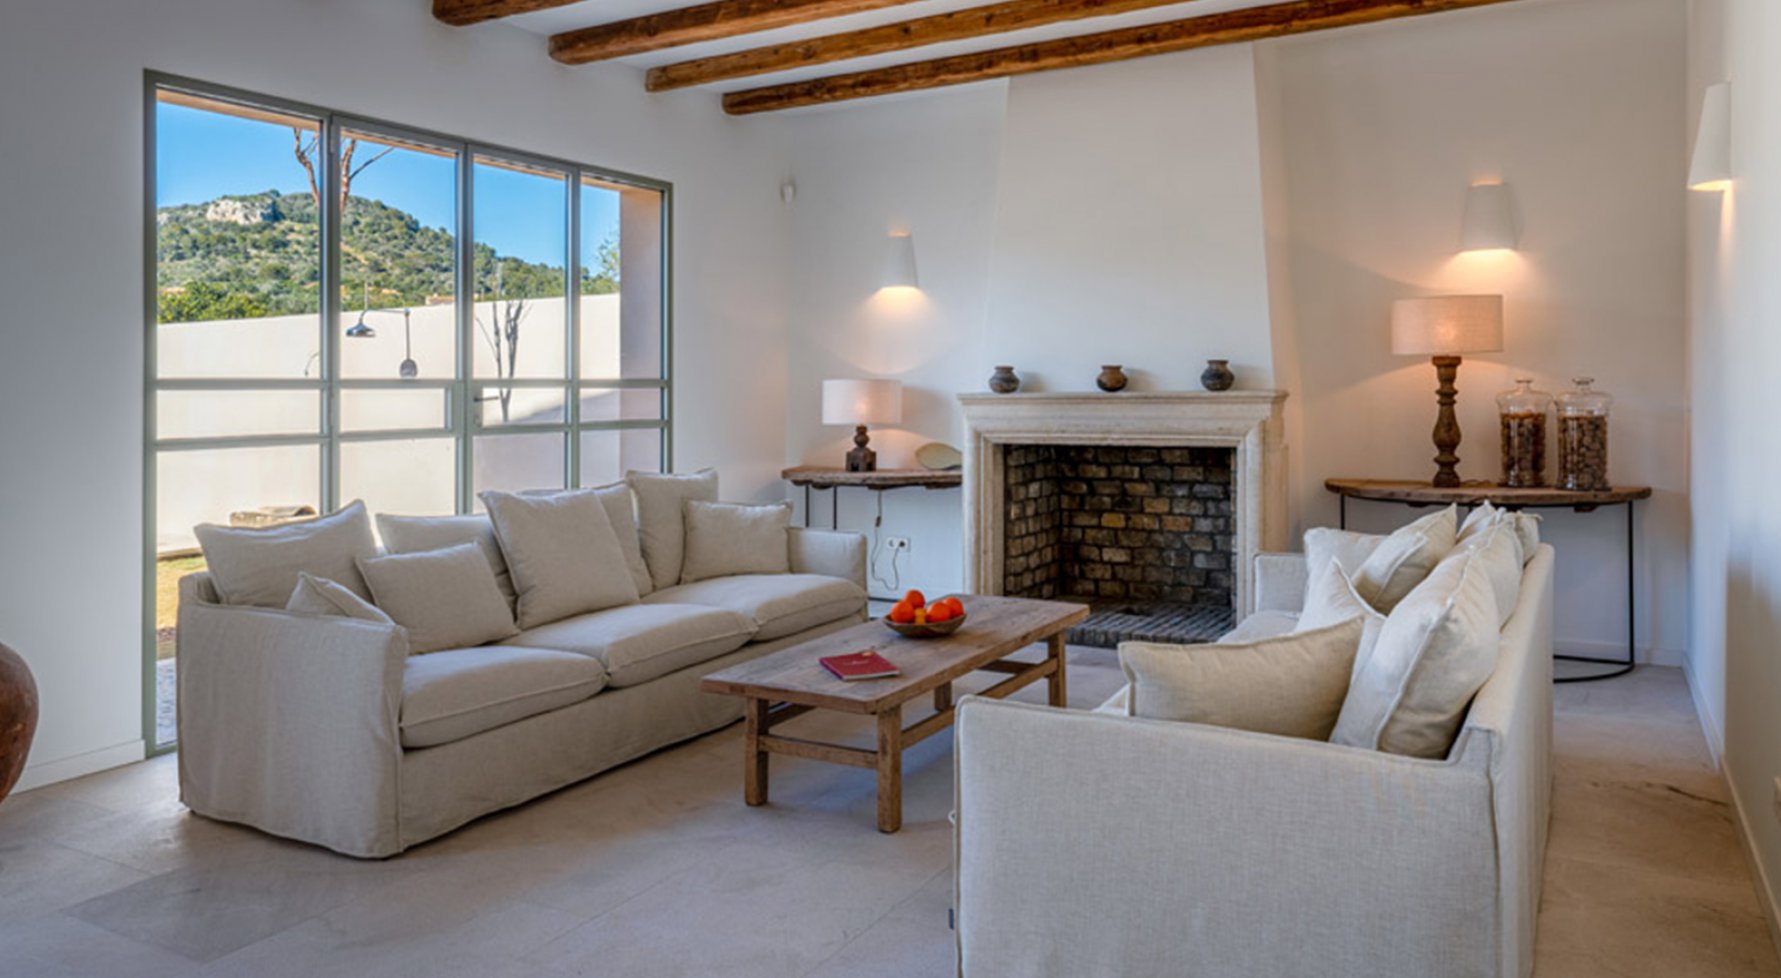 Property in 07691 Spanien - S'Alqueria Blanca: Newly built village house with feel-good character in Alquería Blanca - picture 1